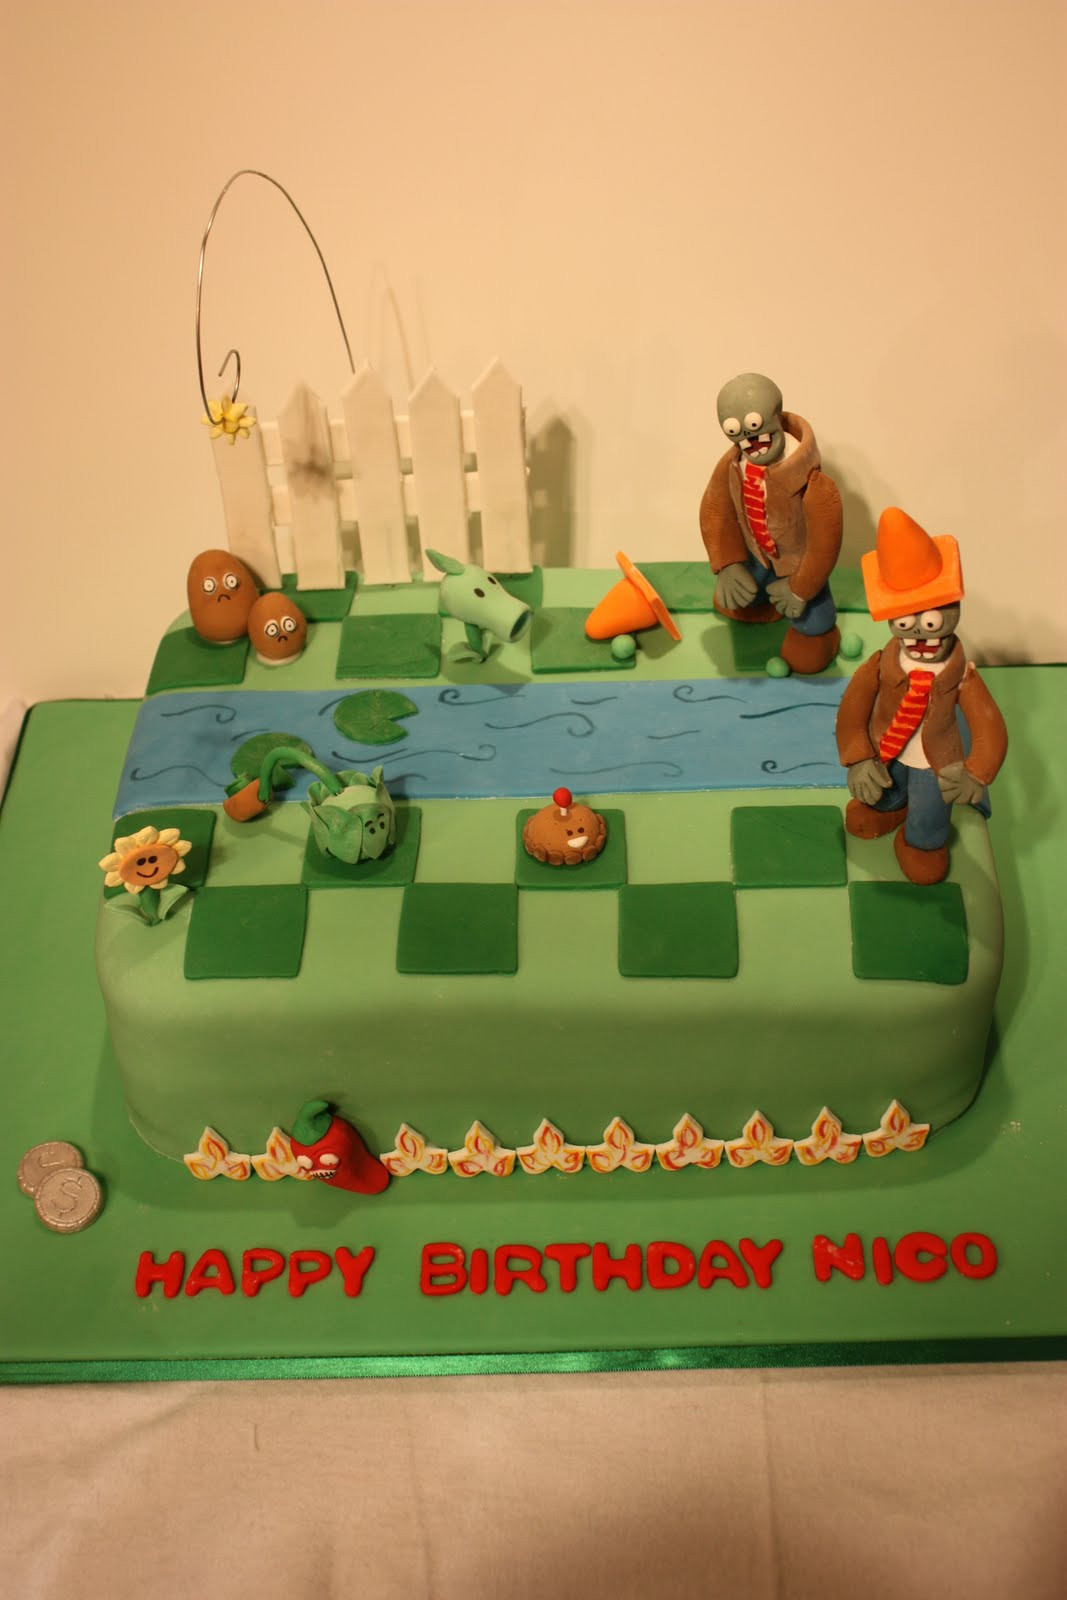 Plants Vs Zombies Birthday Cake
 Whimsical by Design Plants vs Zombies Cake